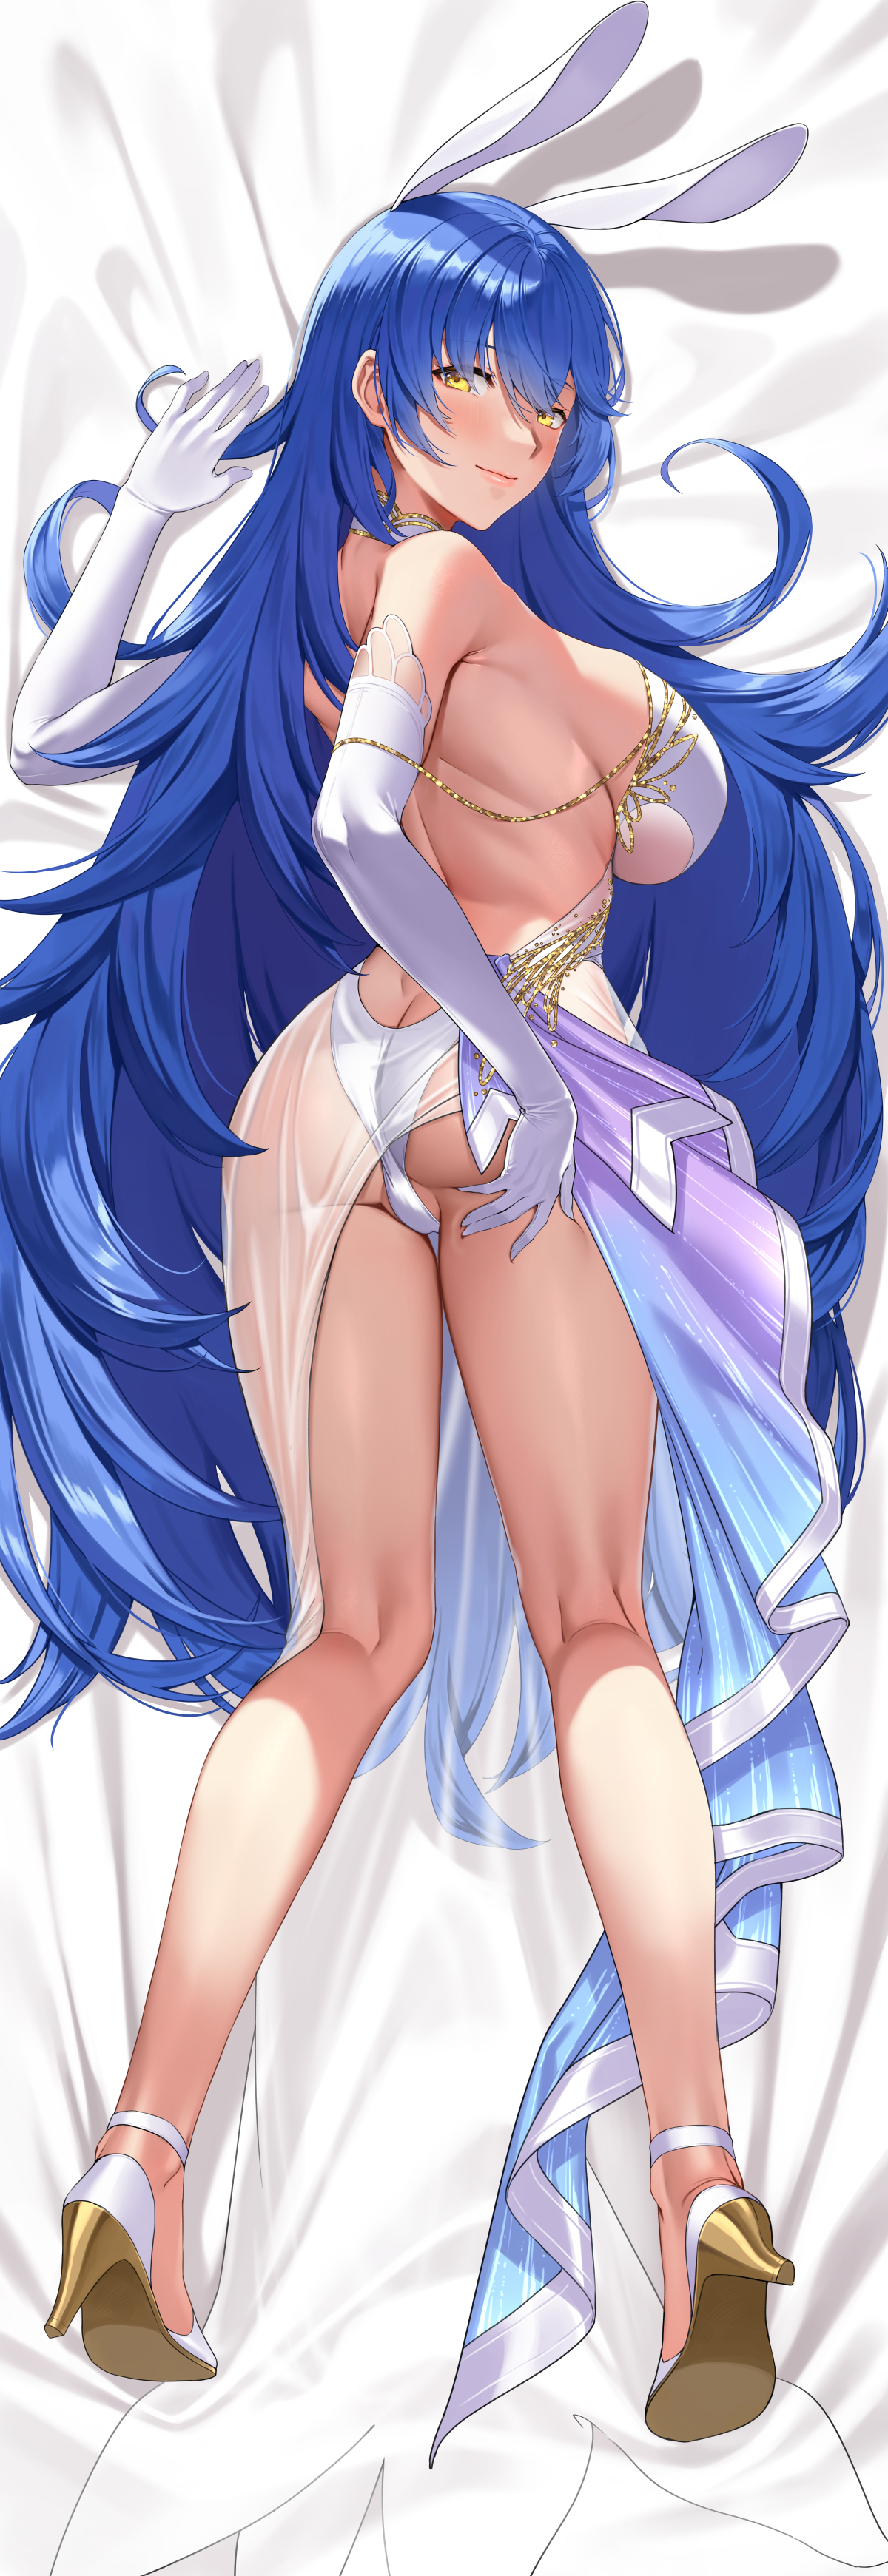 Anime 1200x3483 Girls Frontline rear view portrait display anime girls TAR-21 (Girls Frontline) ass looking back bunny ears animal ears long hair yellow eyes dakimakura blue hair white dress Deras looking at viewer elbow gloves white gloves see-through dress dress bareback huge breasts bare shoulders heels white heels panties white panties lip slip sideboob high heels smiling underwear blushing top view lying down thighs lying on front back butt crack gloves hand on thigh legs